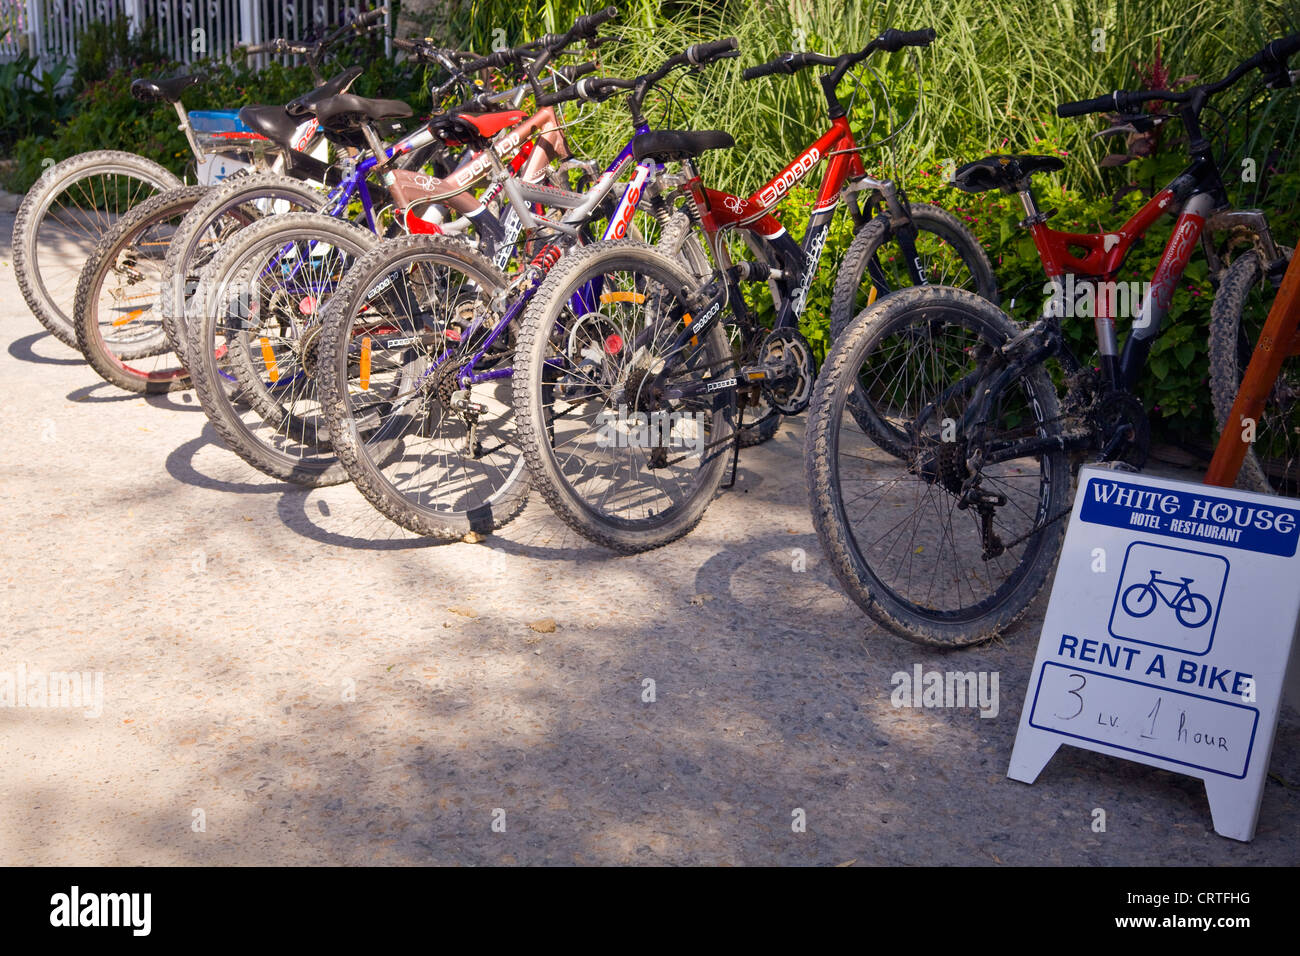 Rent a bike, bicycles for hire in Balchik, Bulgaria Stock Photo